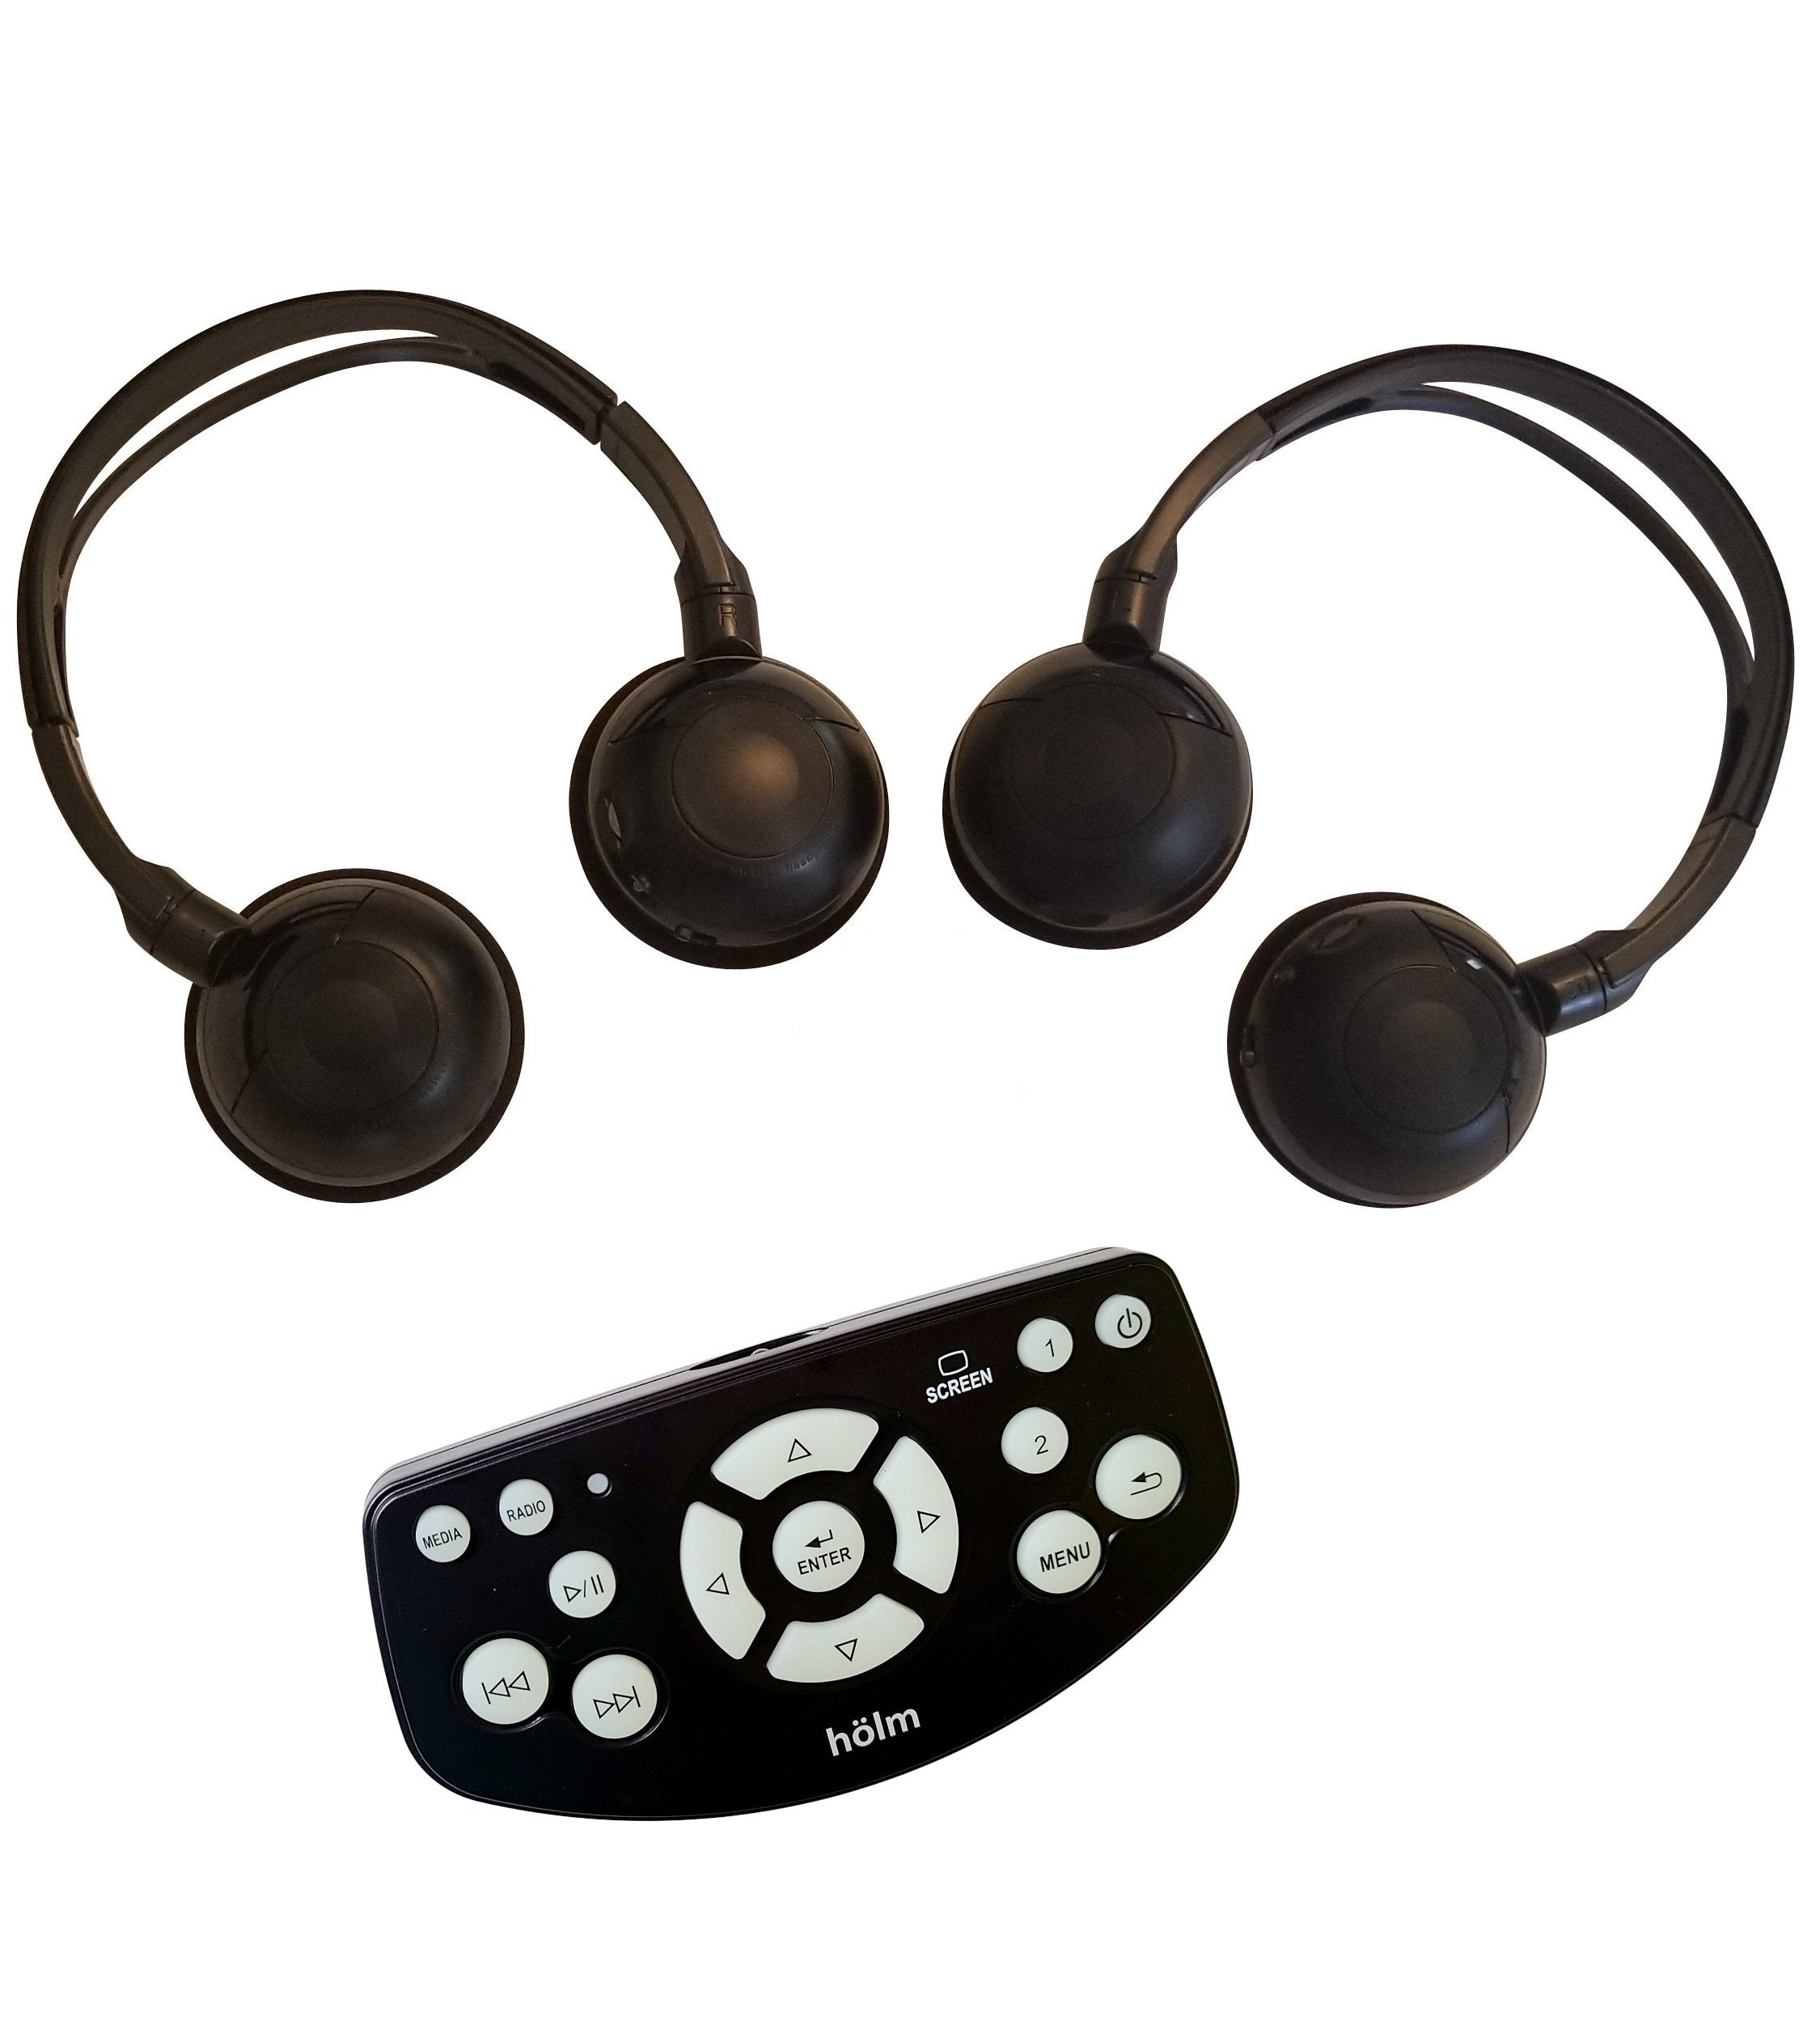 2015 Buick Lacrosse BluRay DVD Remote And Wireless Headphones